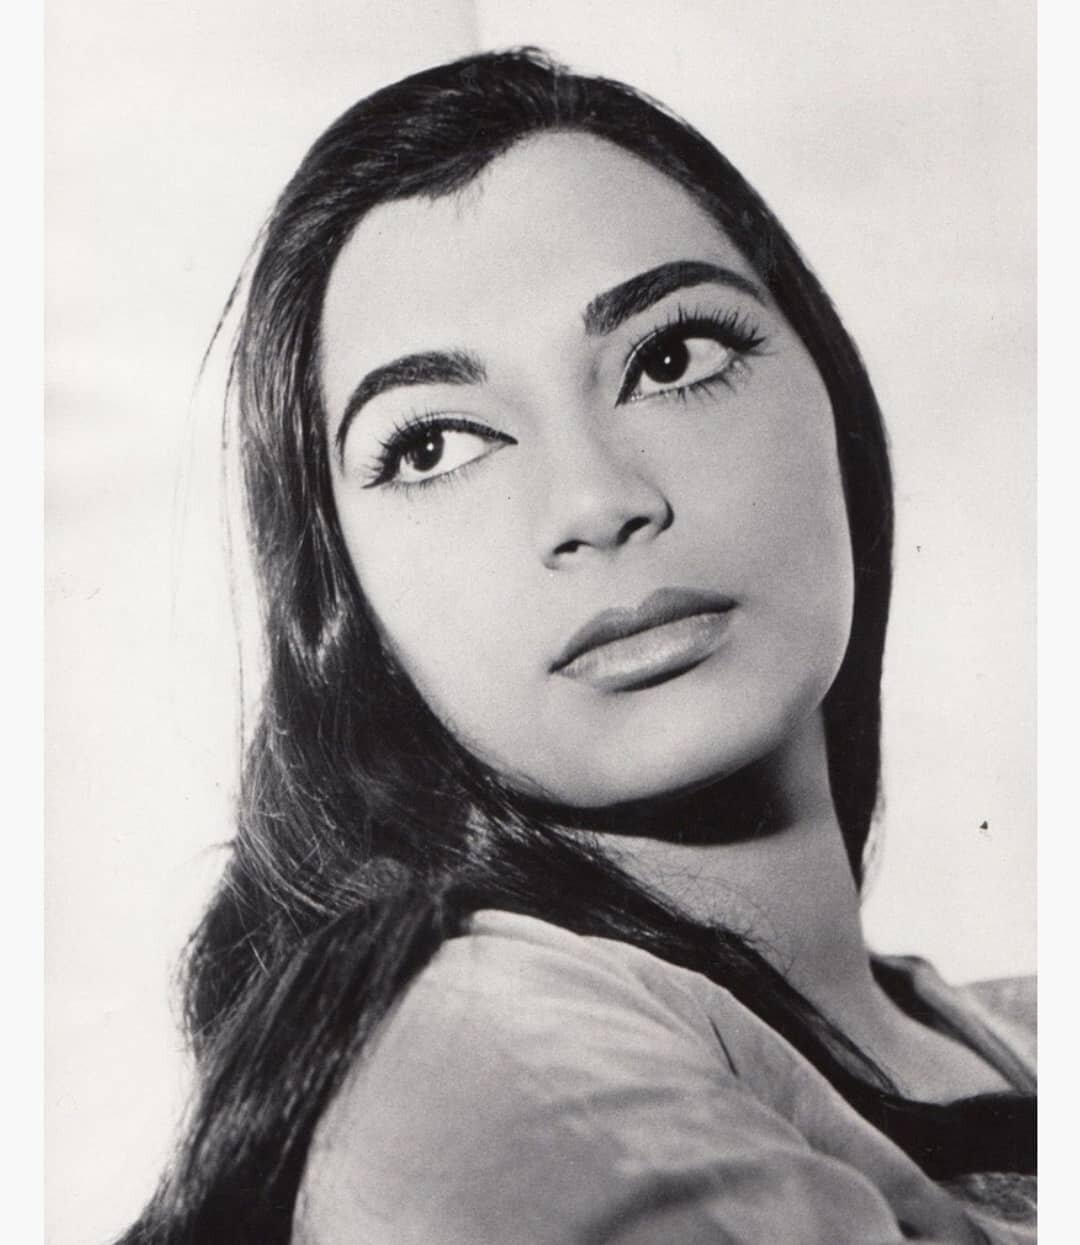 At the age of 15 Simi Garewal made her acting debut in an over-the-top Orientalist extravaganza by MGM - Tarzan Goes to India (1962)! Publicized as &quot;the greatest jungle picture of all time&quot; the film features Tarzan as a globetrotting activi